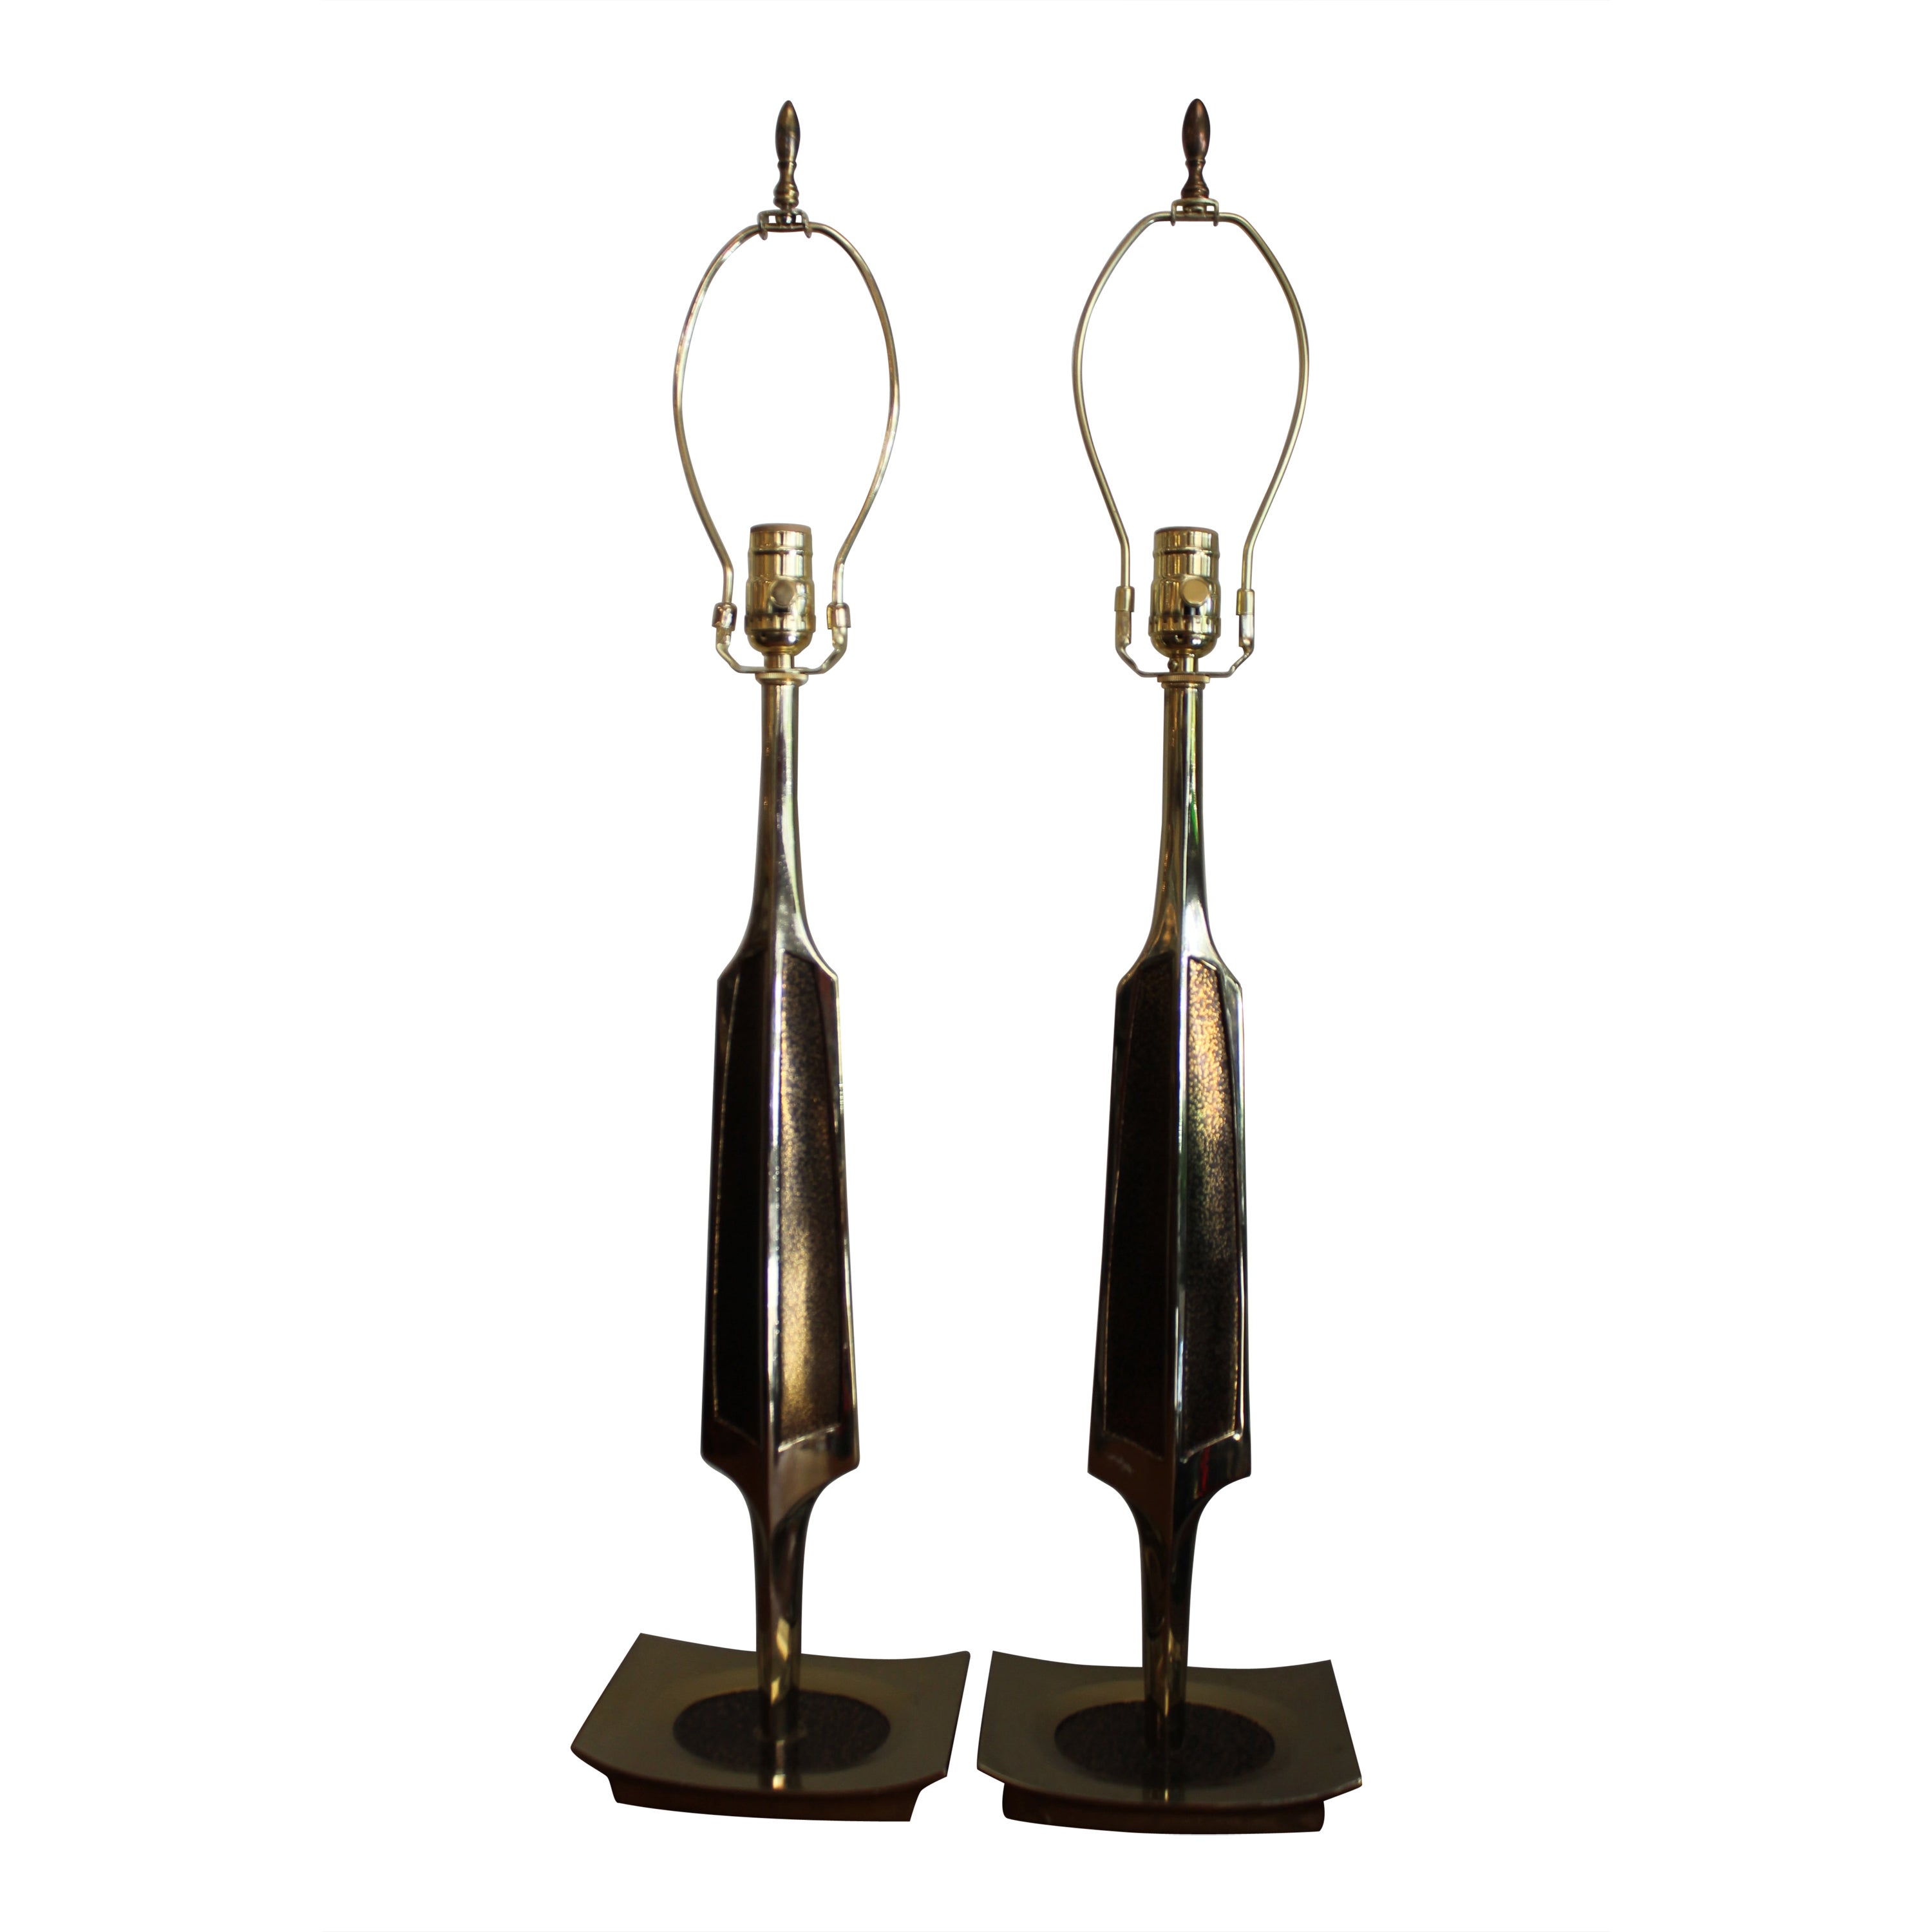 Pair of Lamps for the Laurel Lamp Co.